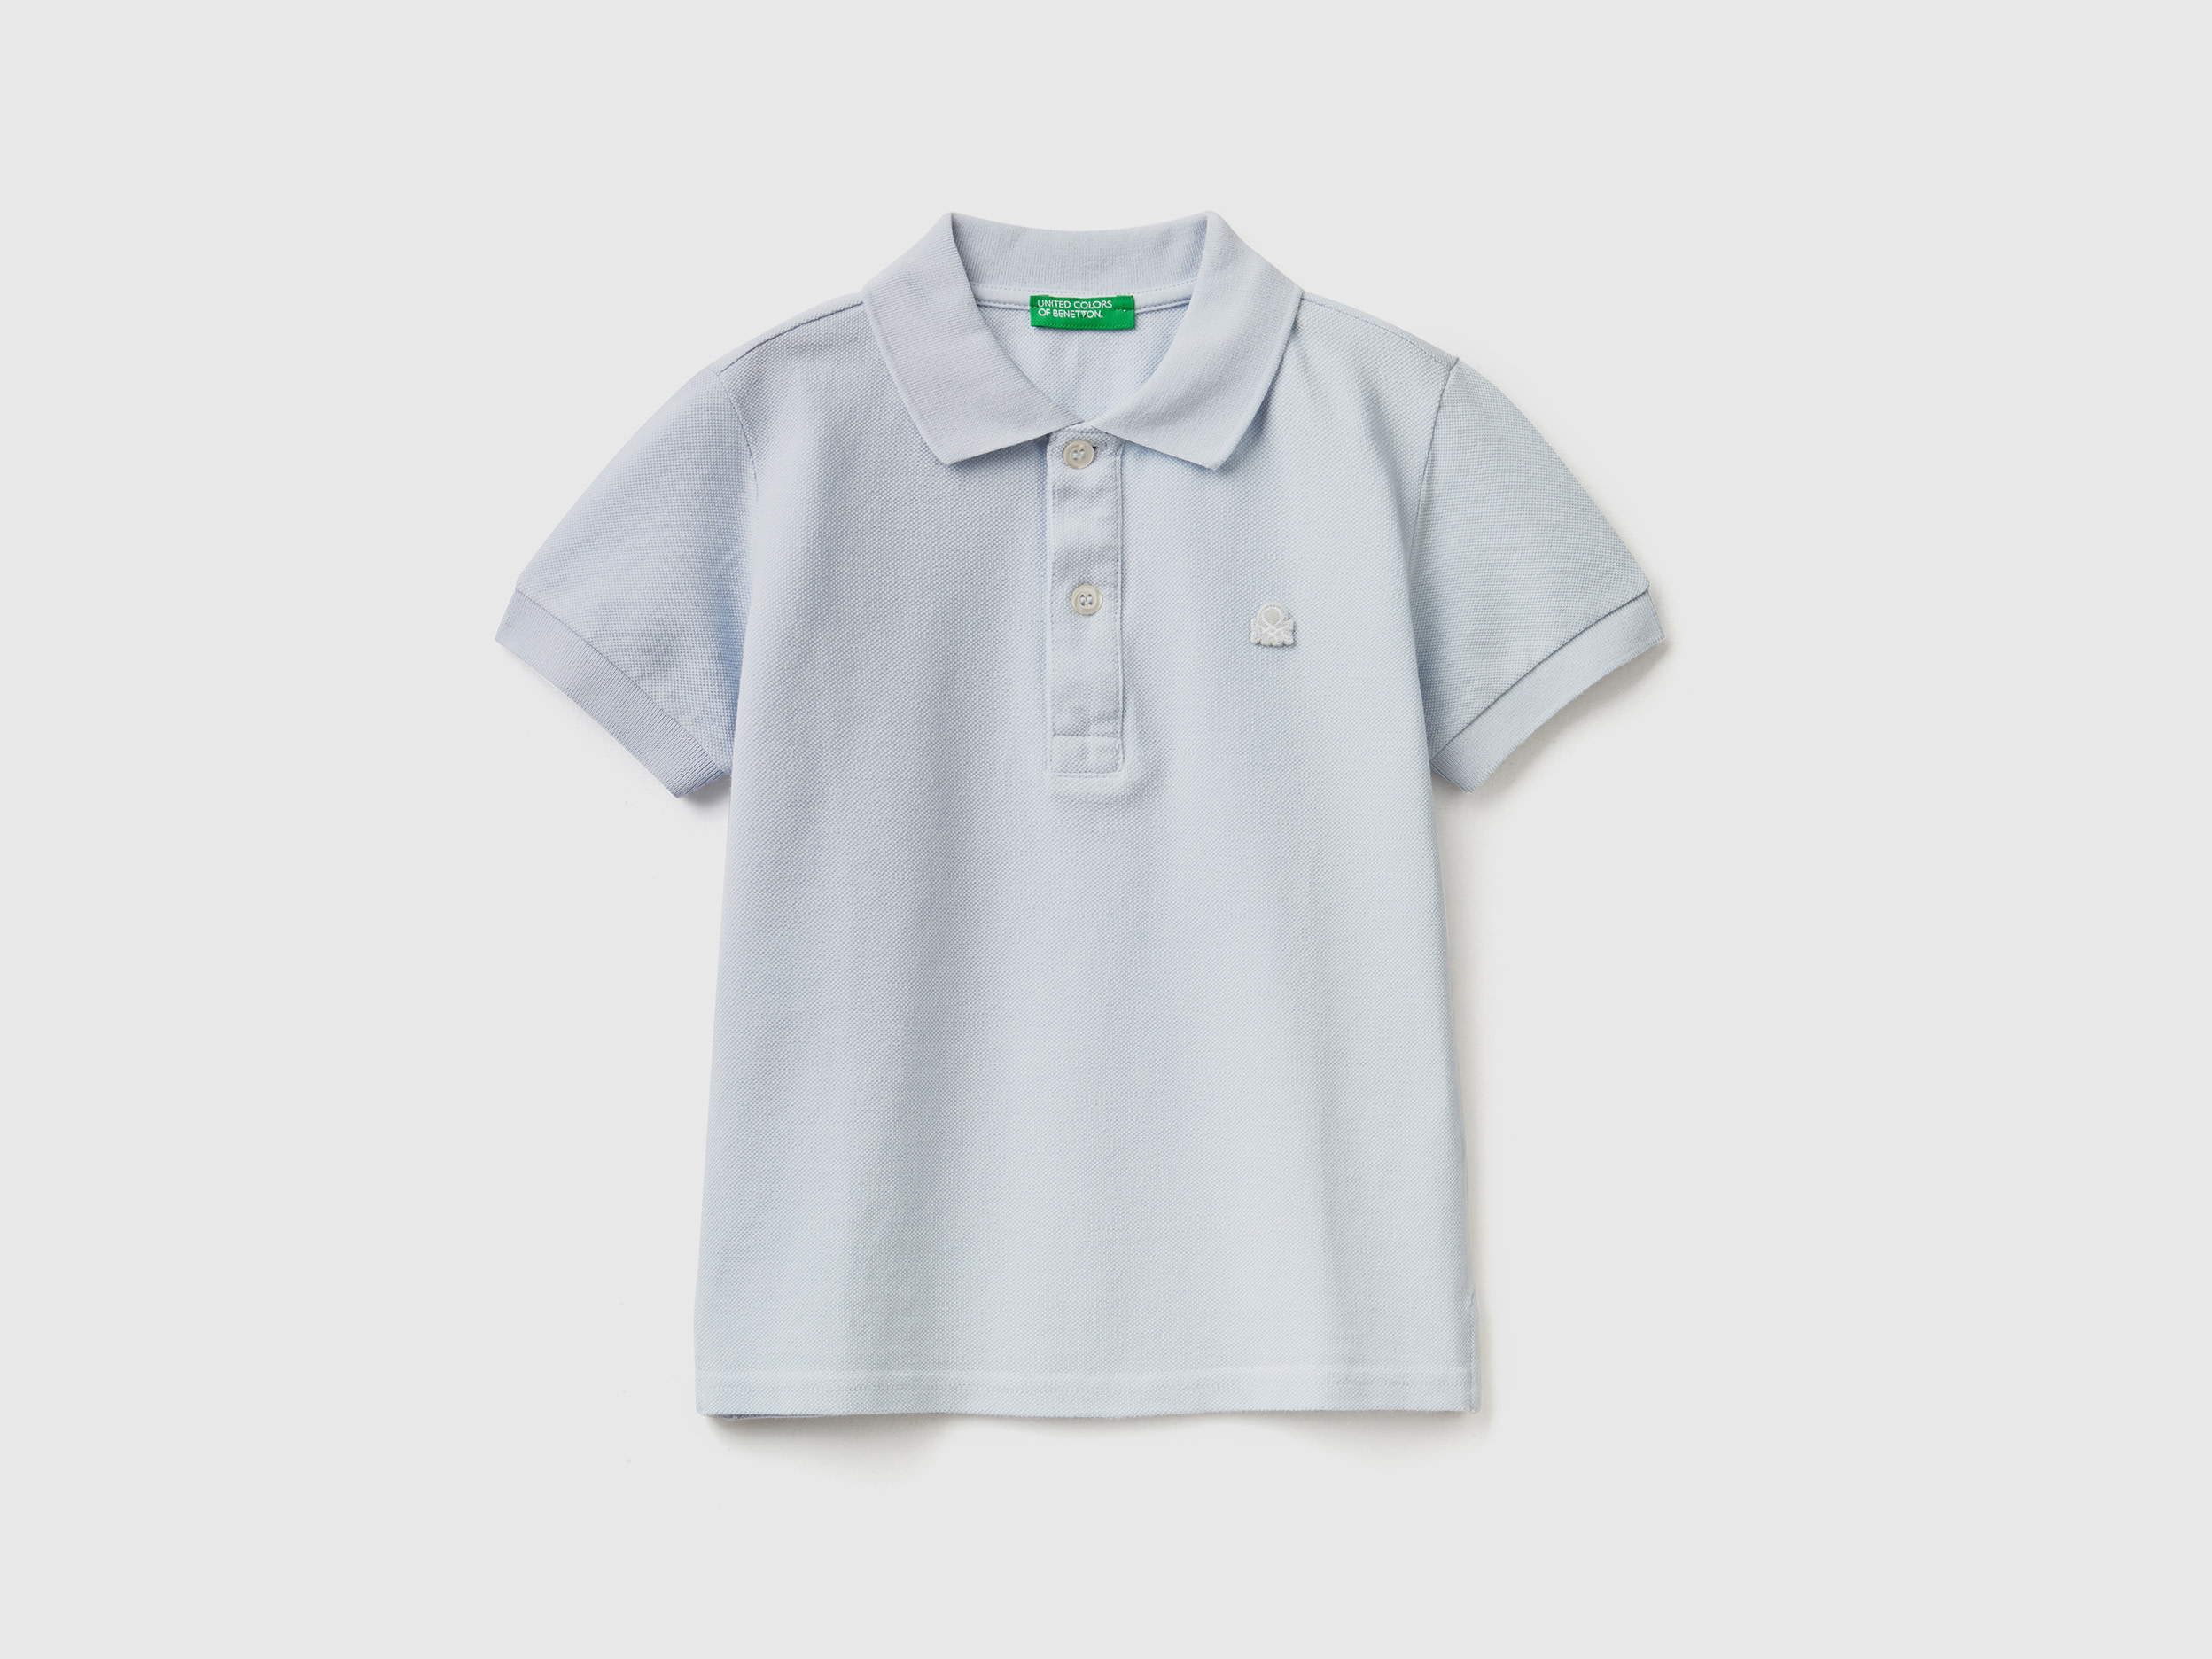 Image of Benetton, Short Sleeve Polo In Organic Cotton, size 104, Sky Blue, Kids